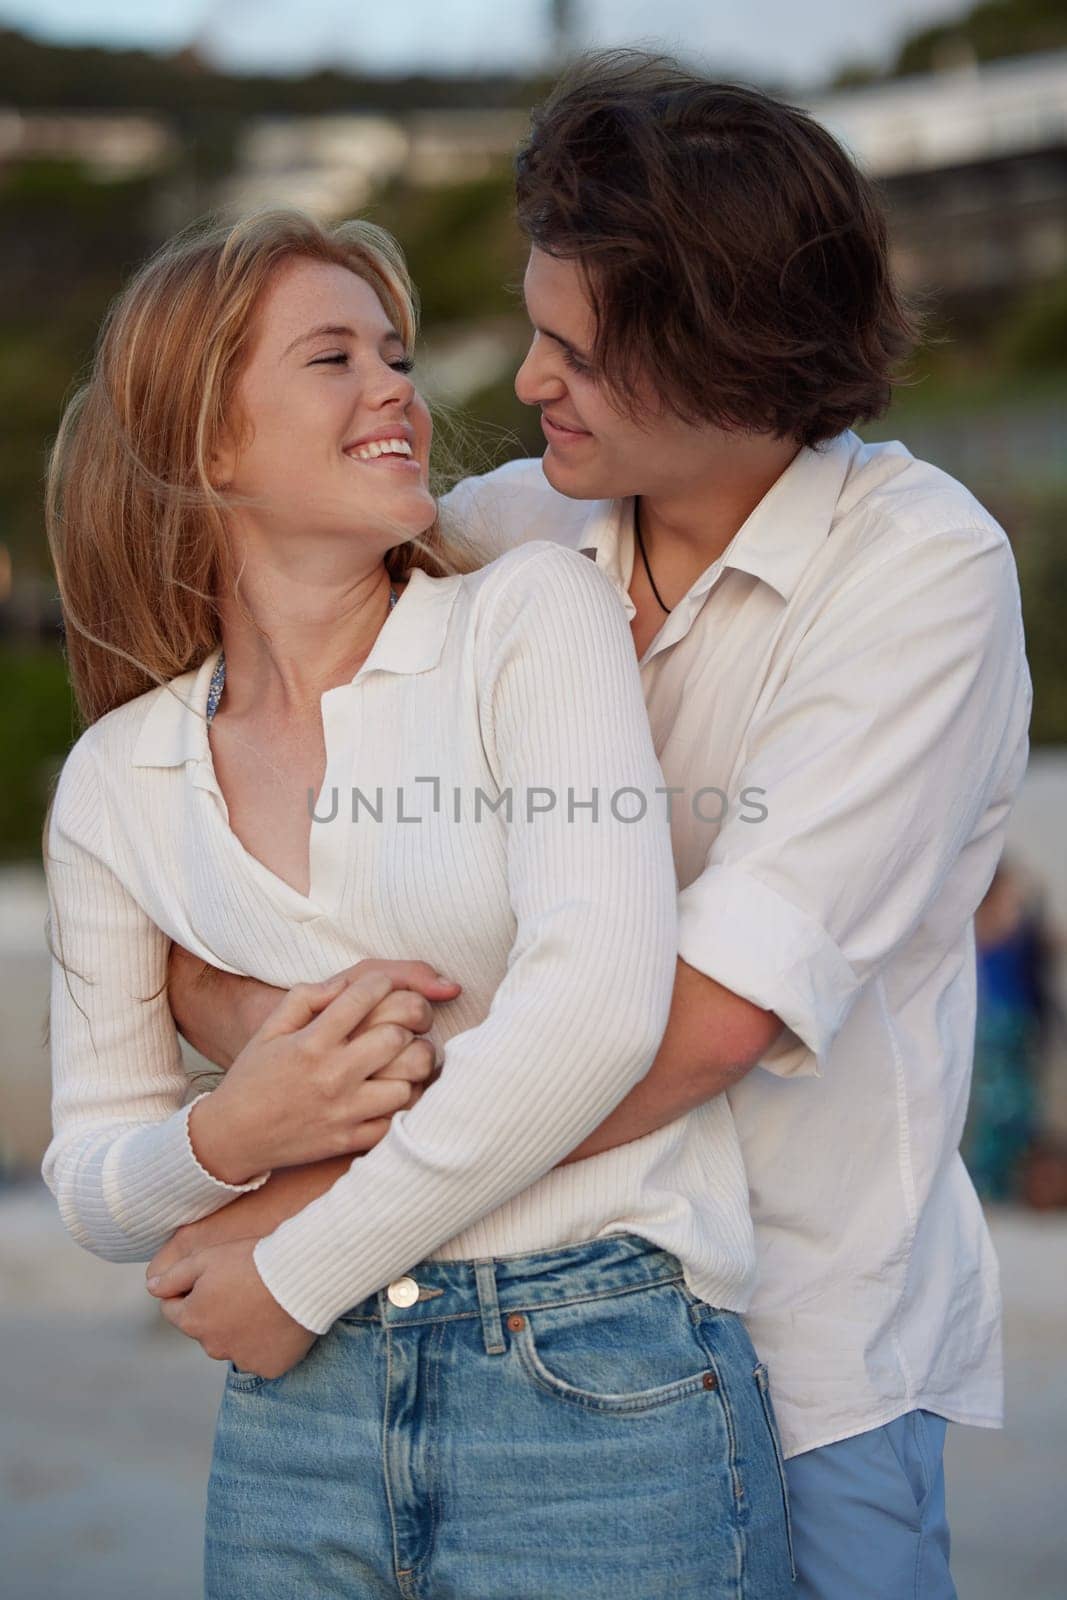 Couple hug on beach, happy and travel with love and commitment in relationship, adventure and romance. Trust, partnership and care with young people outdoor, tropical holiday and happiness on date.